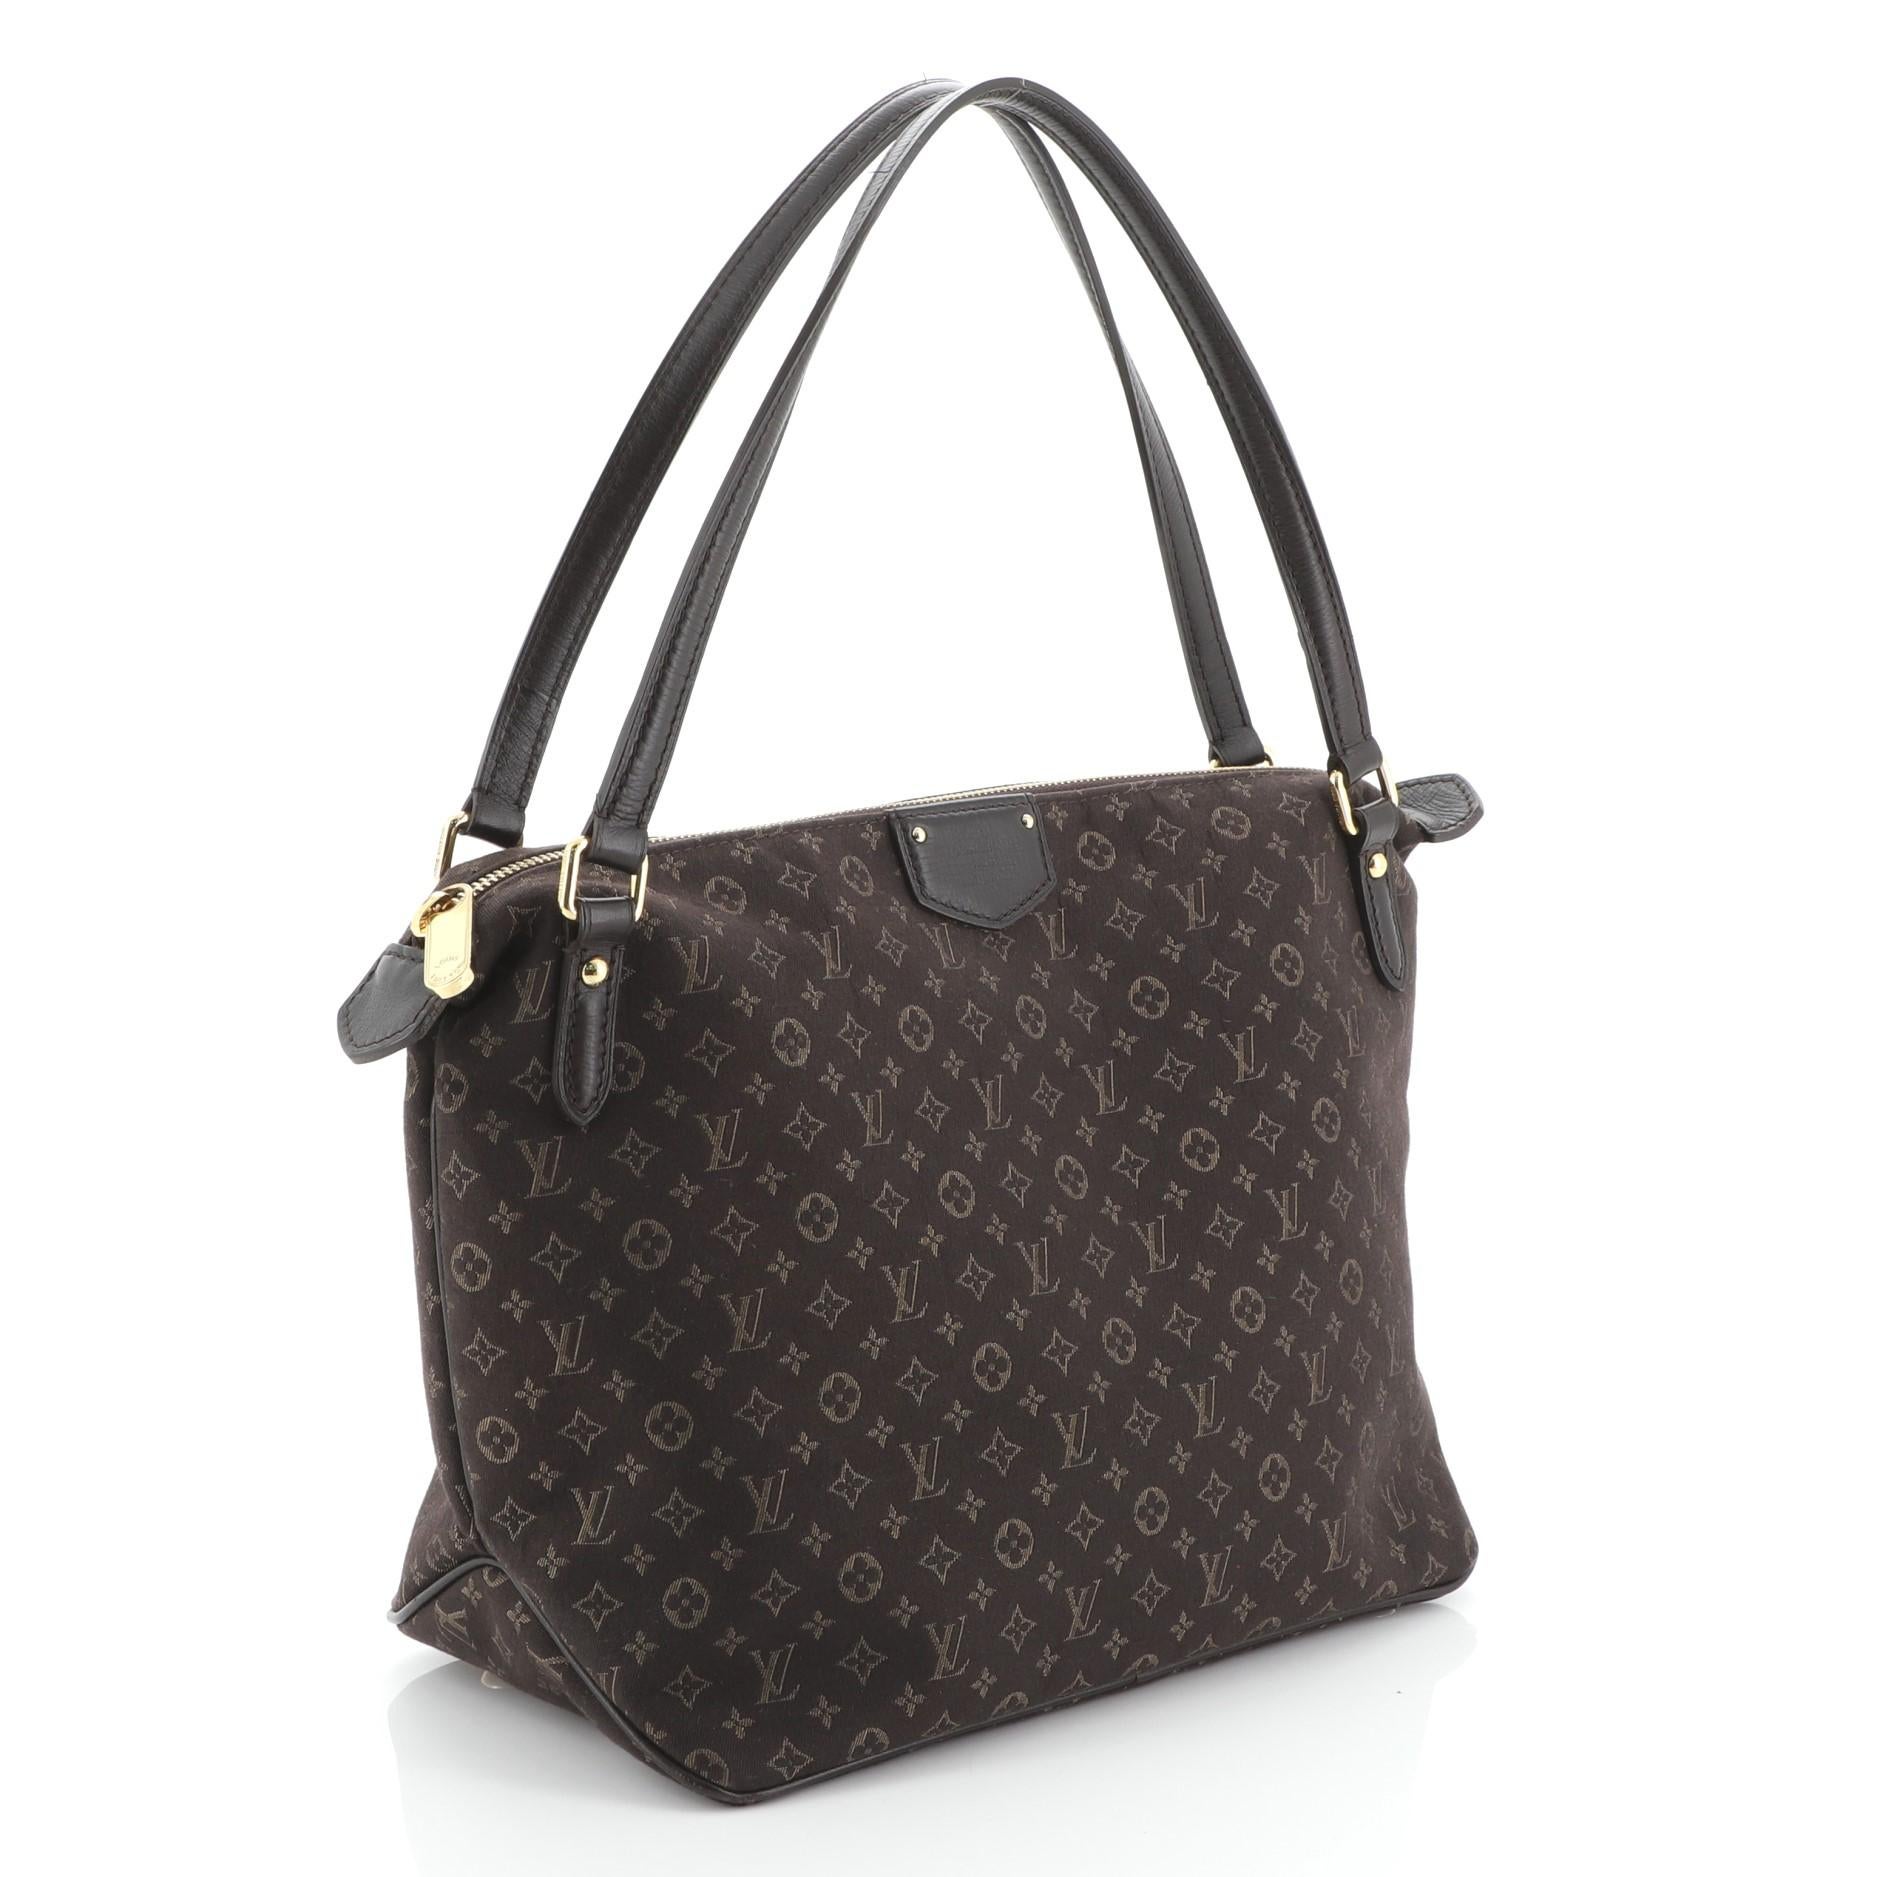 This Louis Vuitton Ballade Handbag Monogram Idylle PM, crafted from brown monogram idylle, features dual flat leather handles, leather trim, protective base studs and gold-tone hardware. Its zip closure opens to a purple fabric interior with zip and